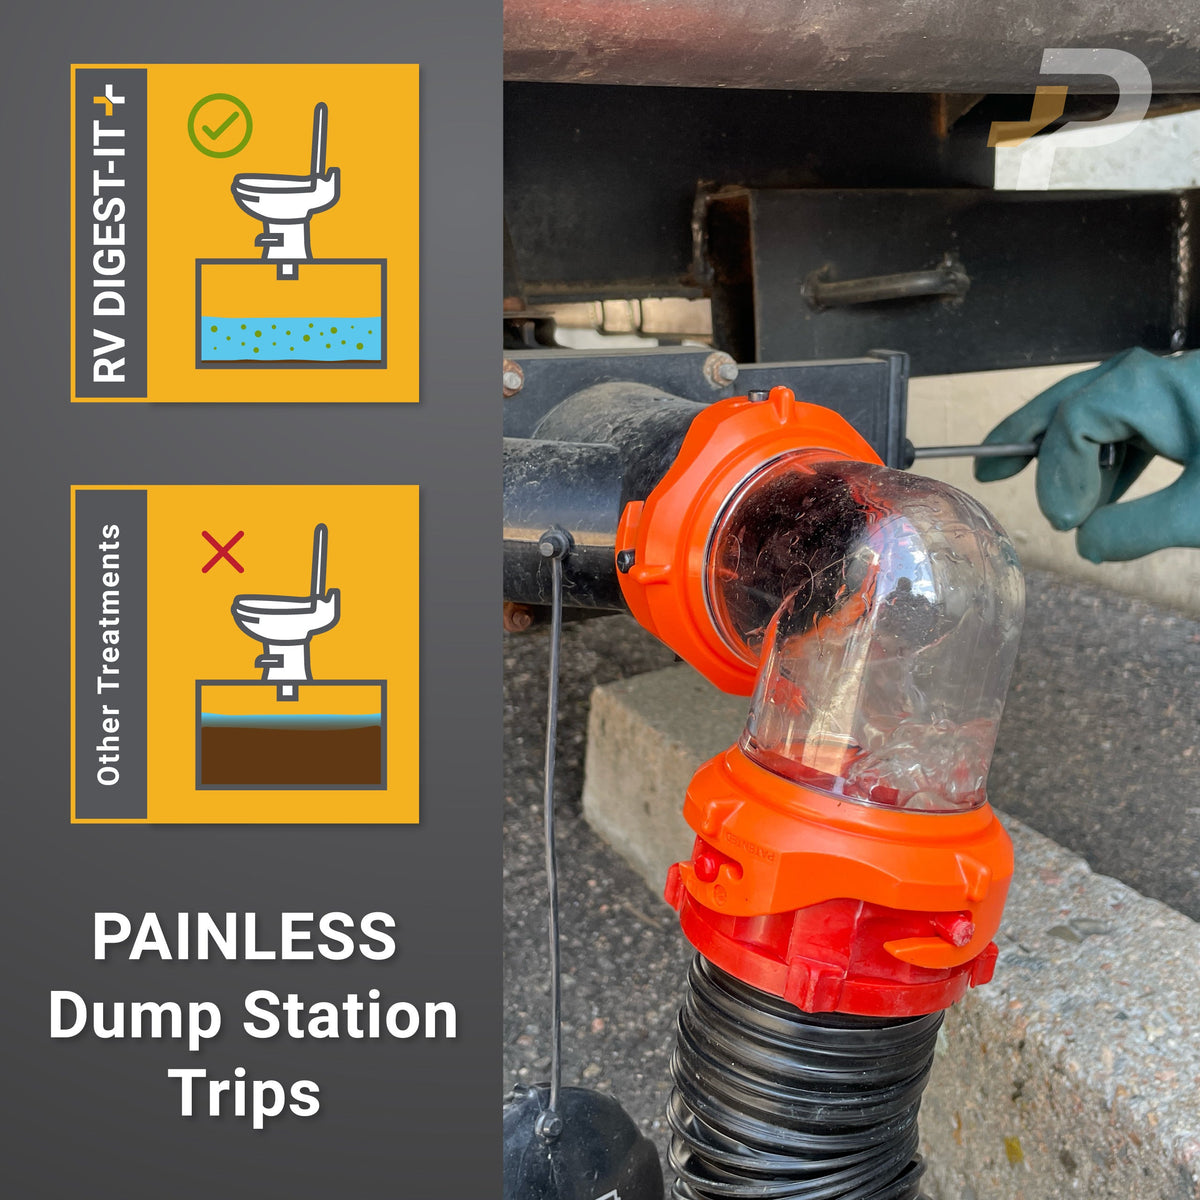 RV Digest-It Plus makes trips to the dumpstation easy and painless. Prevent clogs and waste build-up